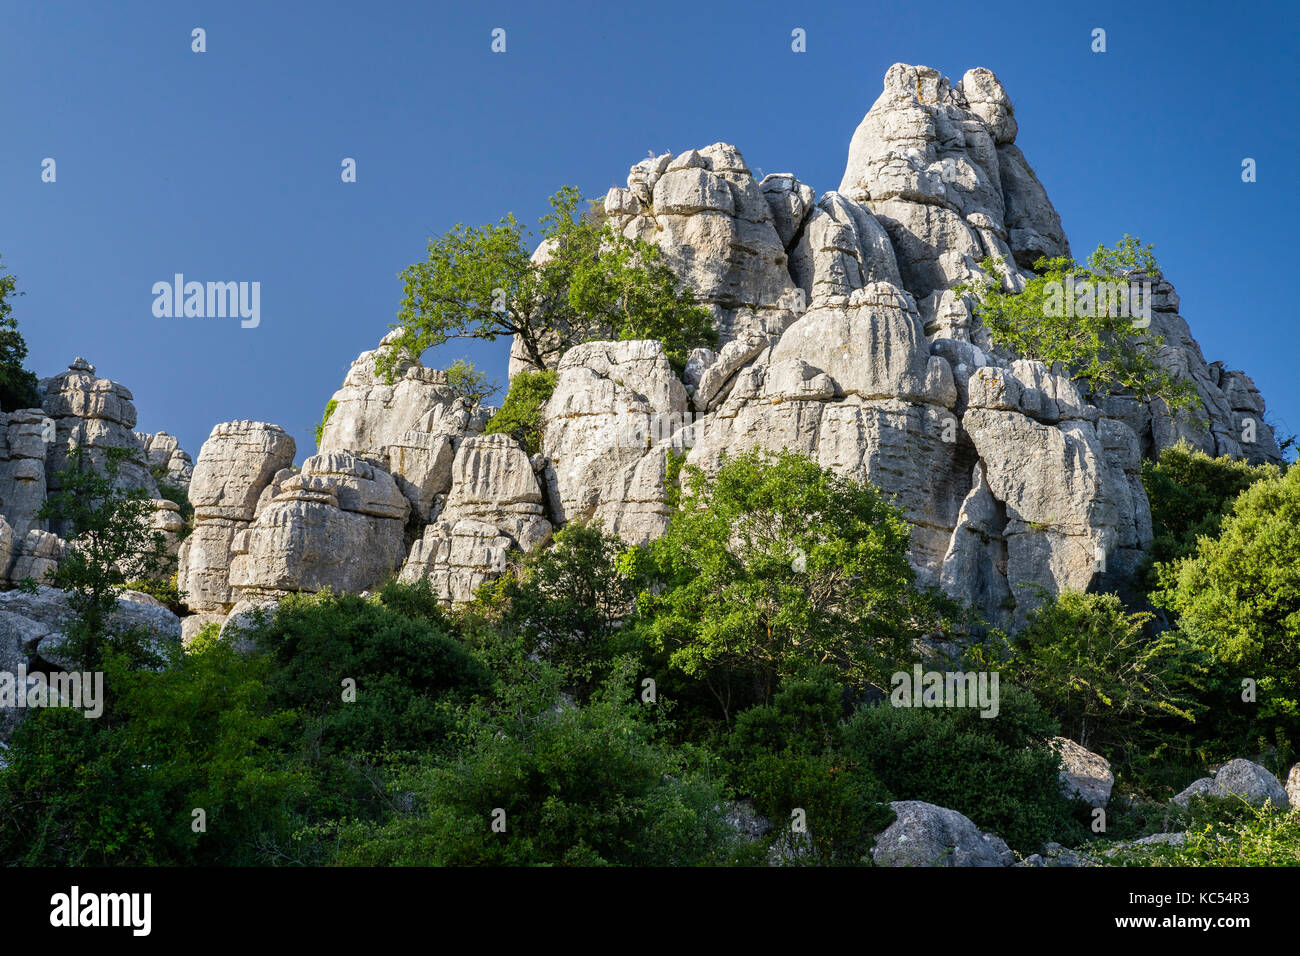 Bizarre limestone rock formations, El Torcal Nature Reserve, Antequera, Province of Malaga, Andalusia, Spain Stock Photo